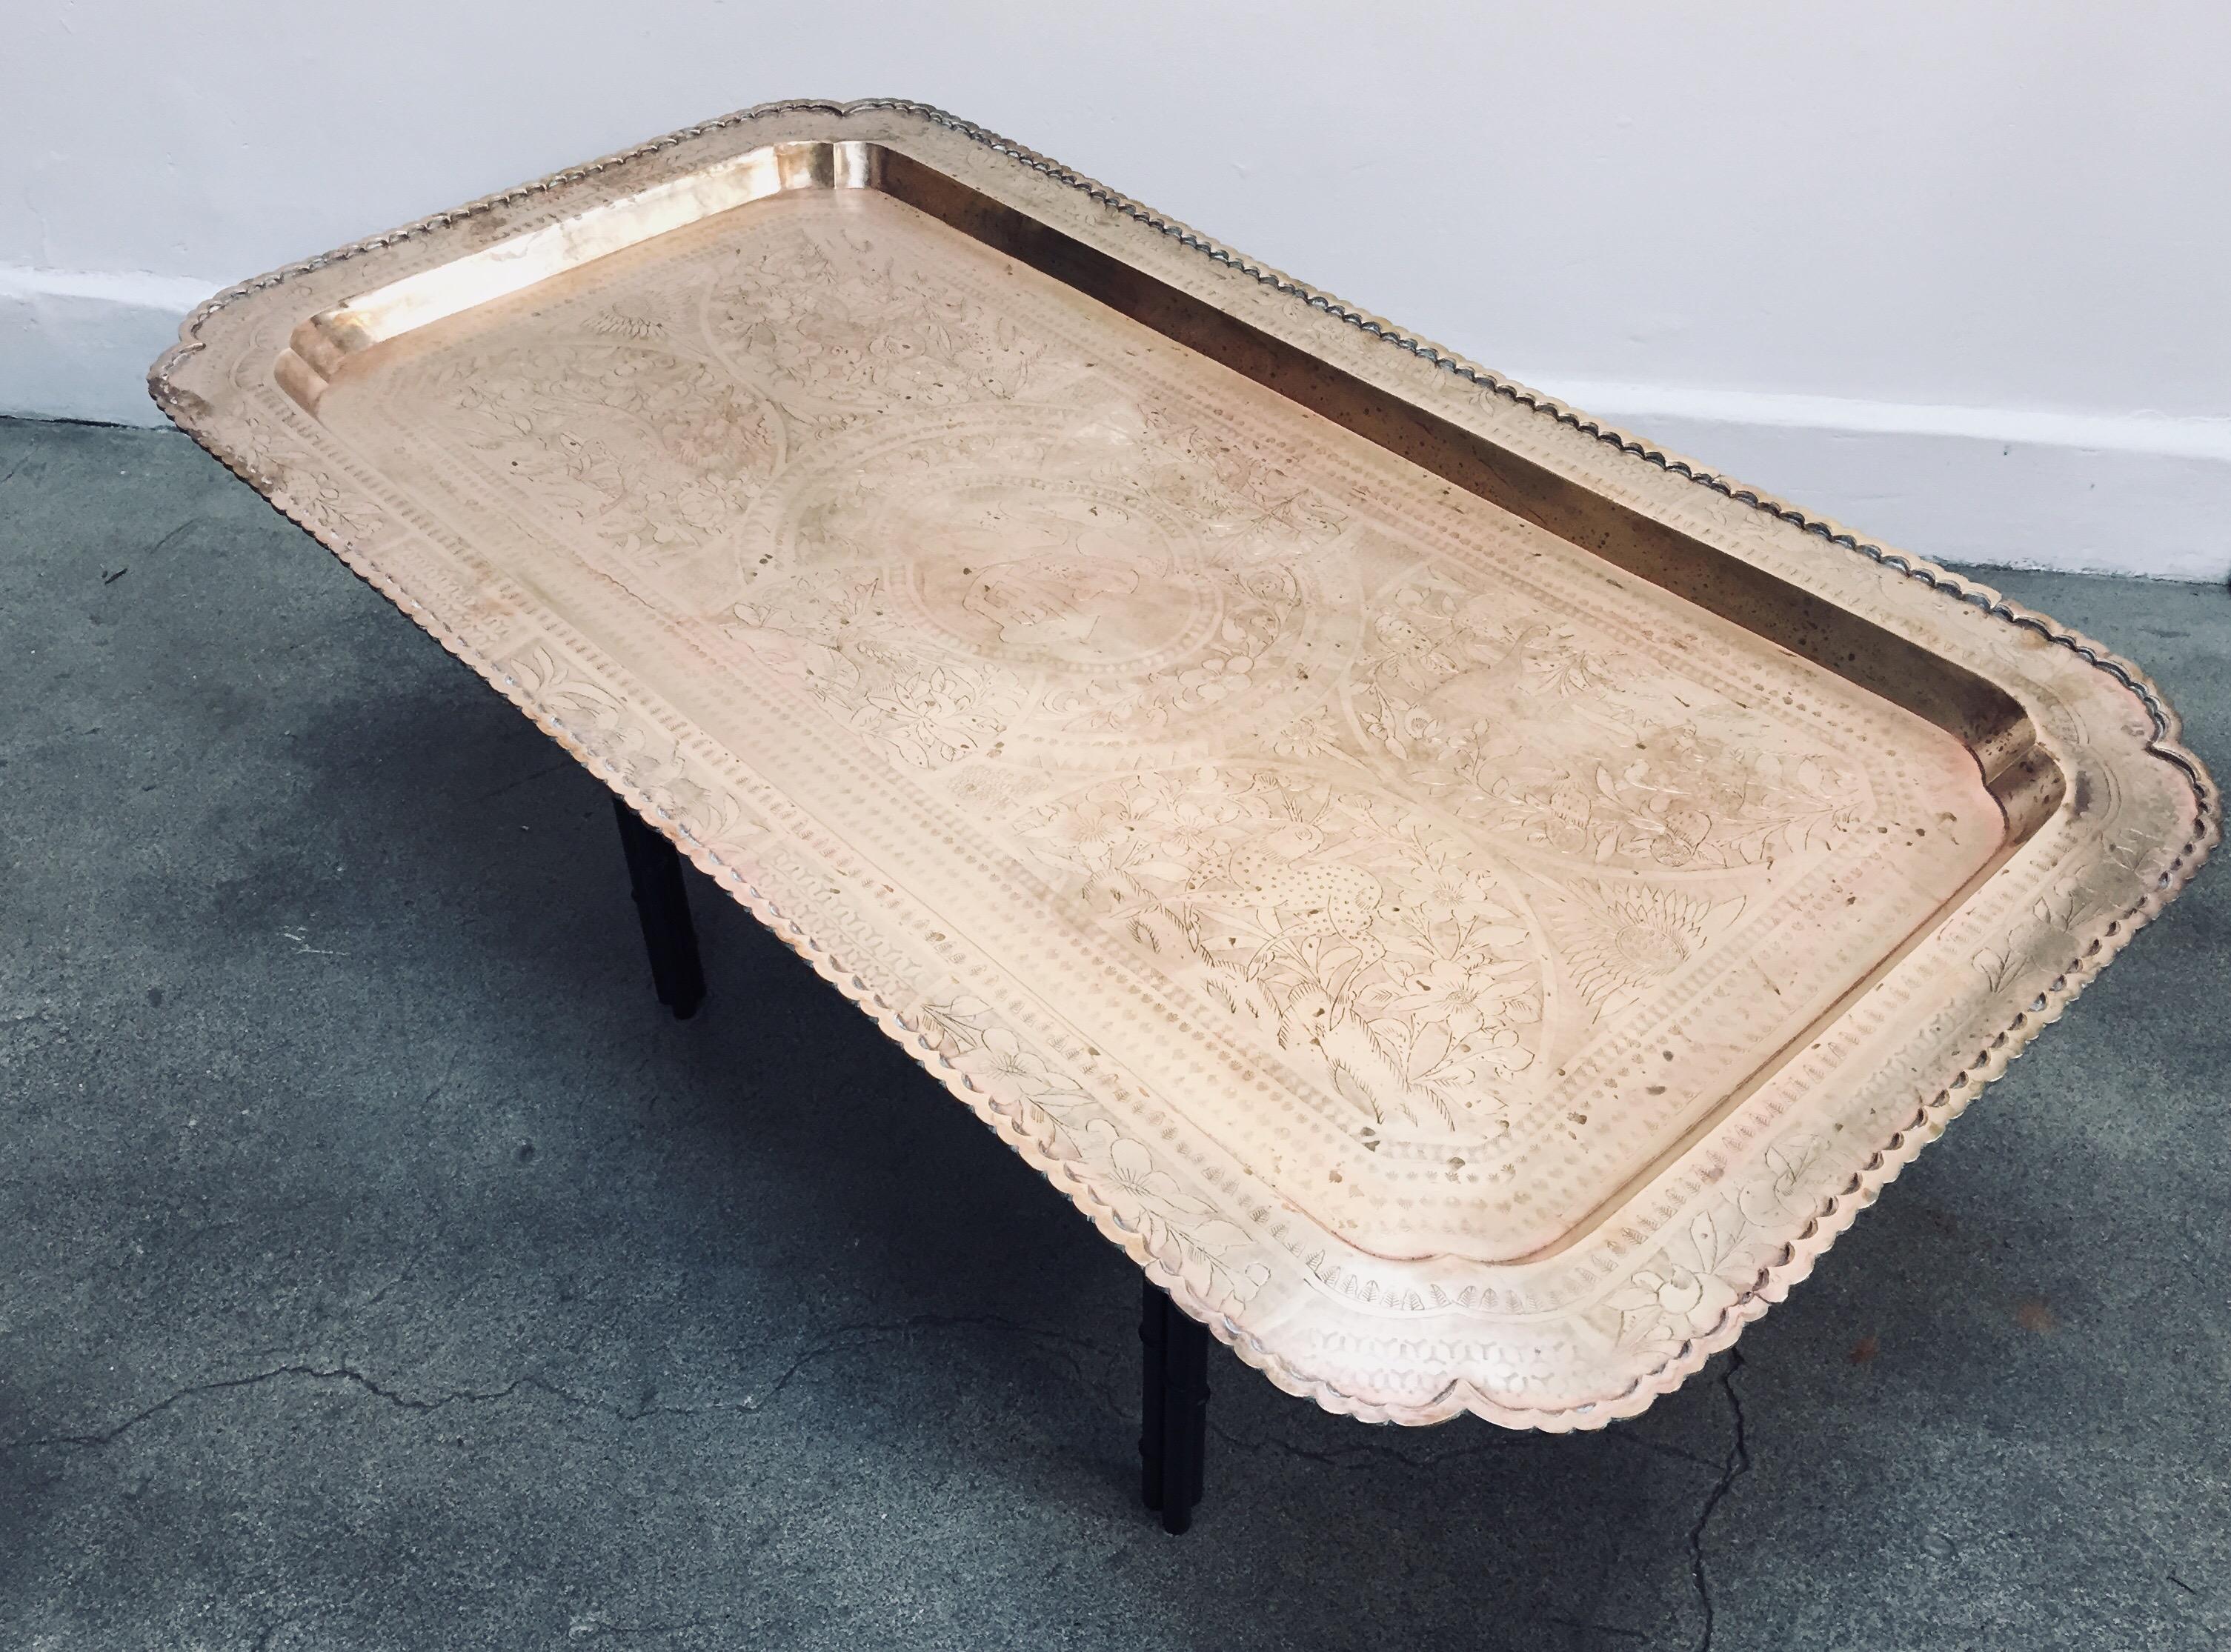 Hollywood Regency style, midcentury brass tray table with etched rectangular brass tray.
Sit on a metal faux bamboo base in black color.
Made in Honk Kong with Chinese design and scenes of animals.
Measures: Base 14